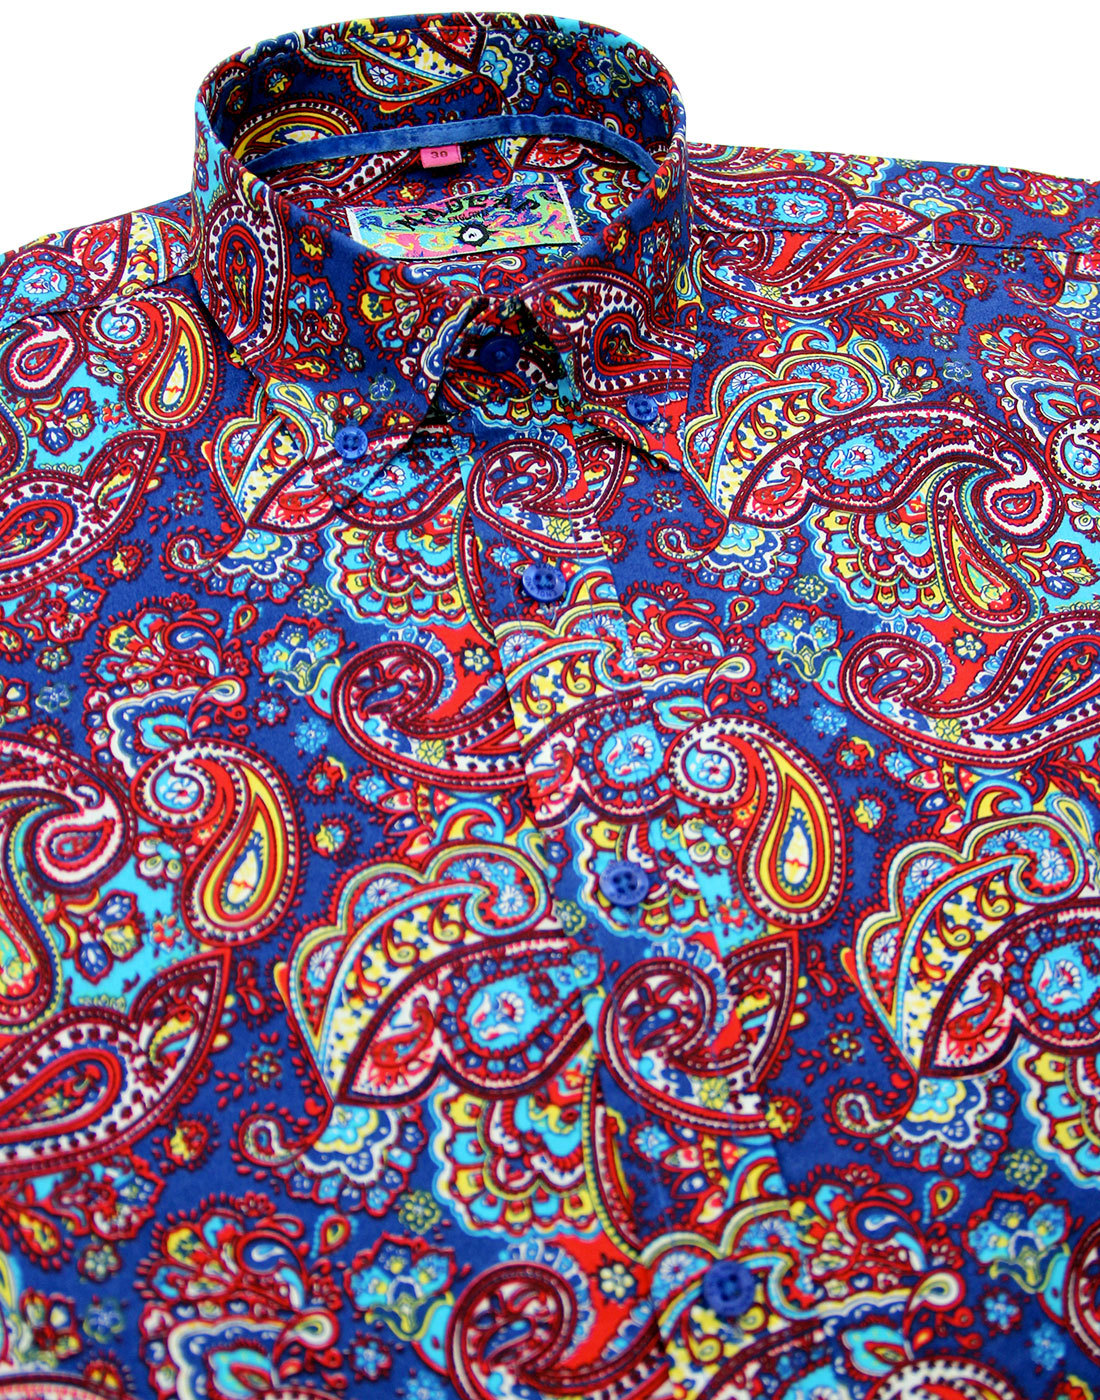 MADCAP ENGLAND Tabla Paisley Psychedelic 1960s Mod Shirt in Royal